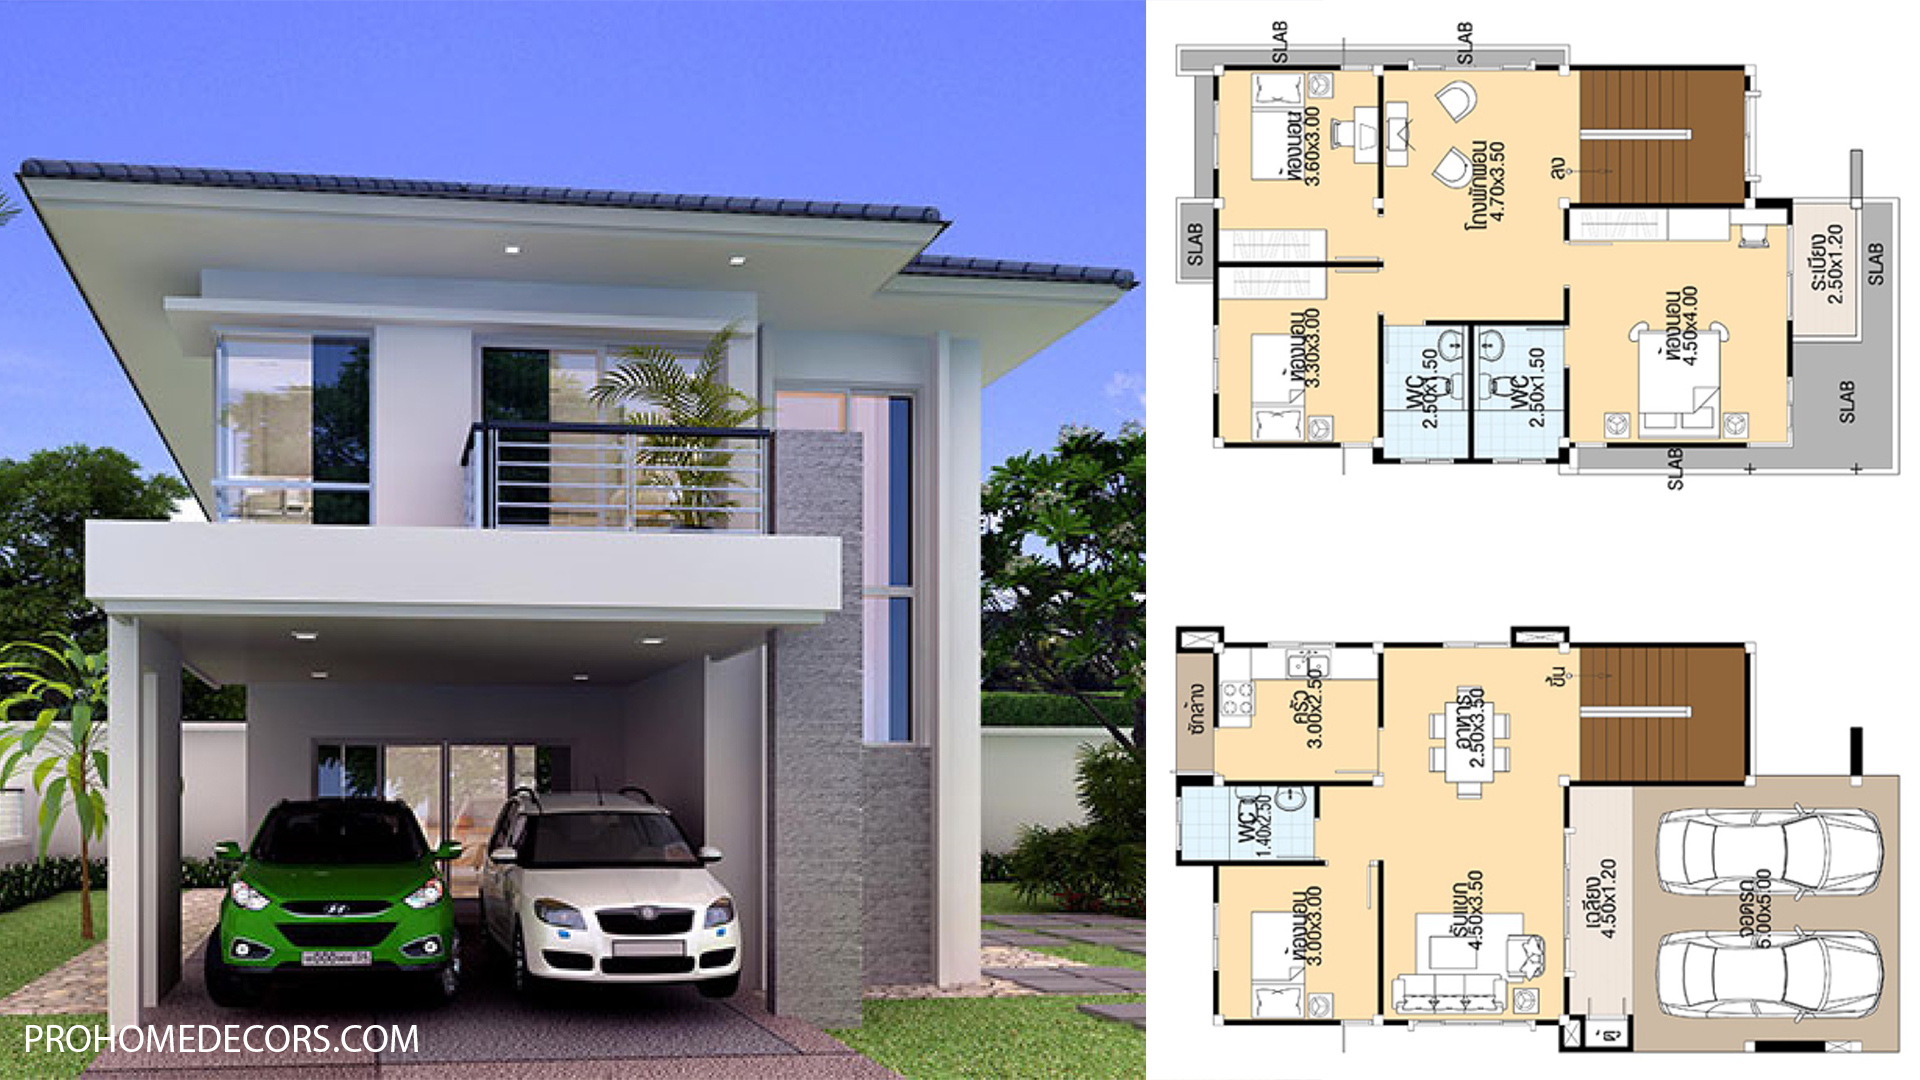 House Designs 7 5x13 Meter With 4 Bedrooms Pro Home Decors